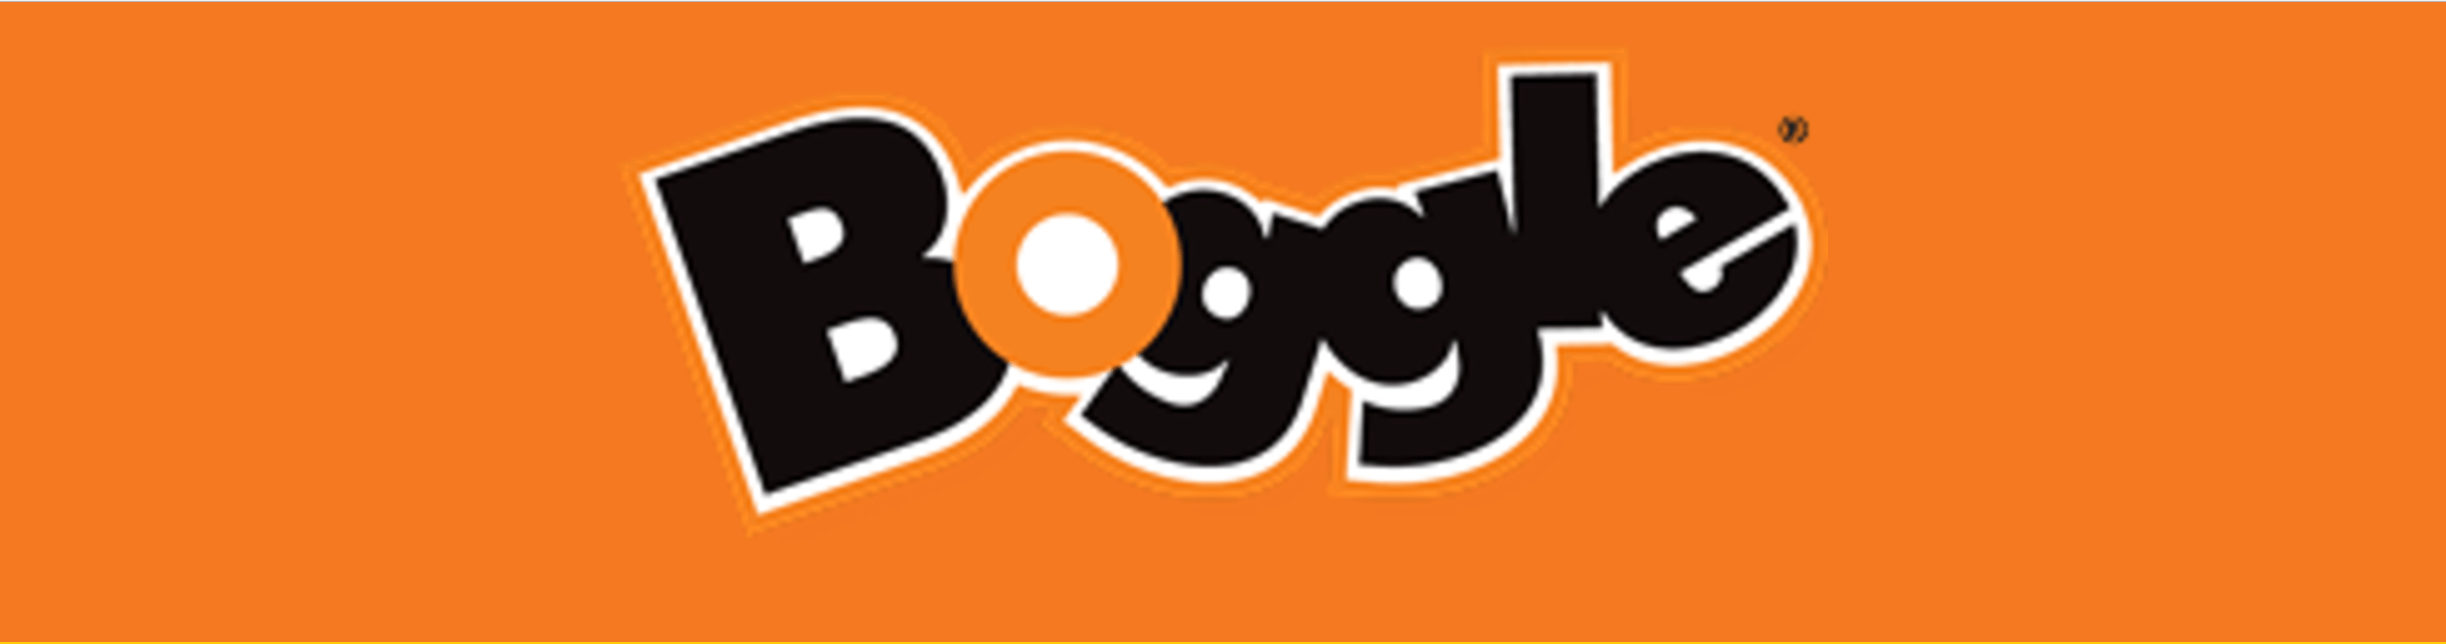 Boggle Logo - Creating a Boggle Game using React: Part 1 | Codementor